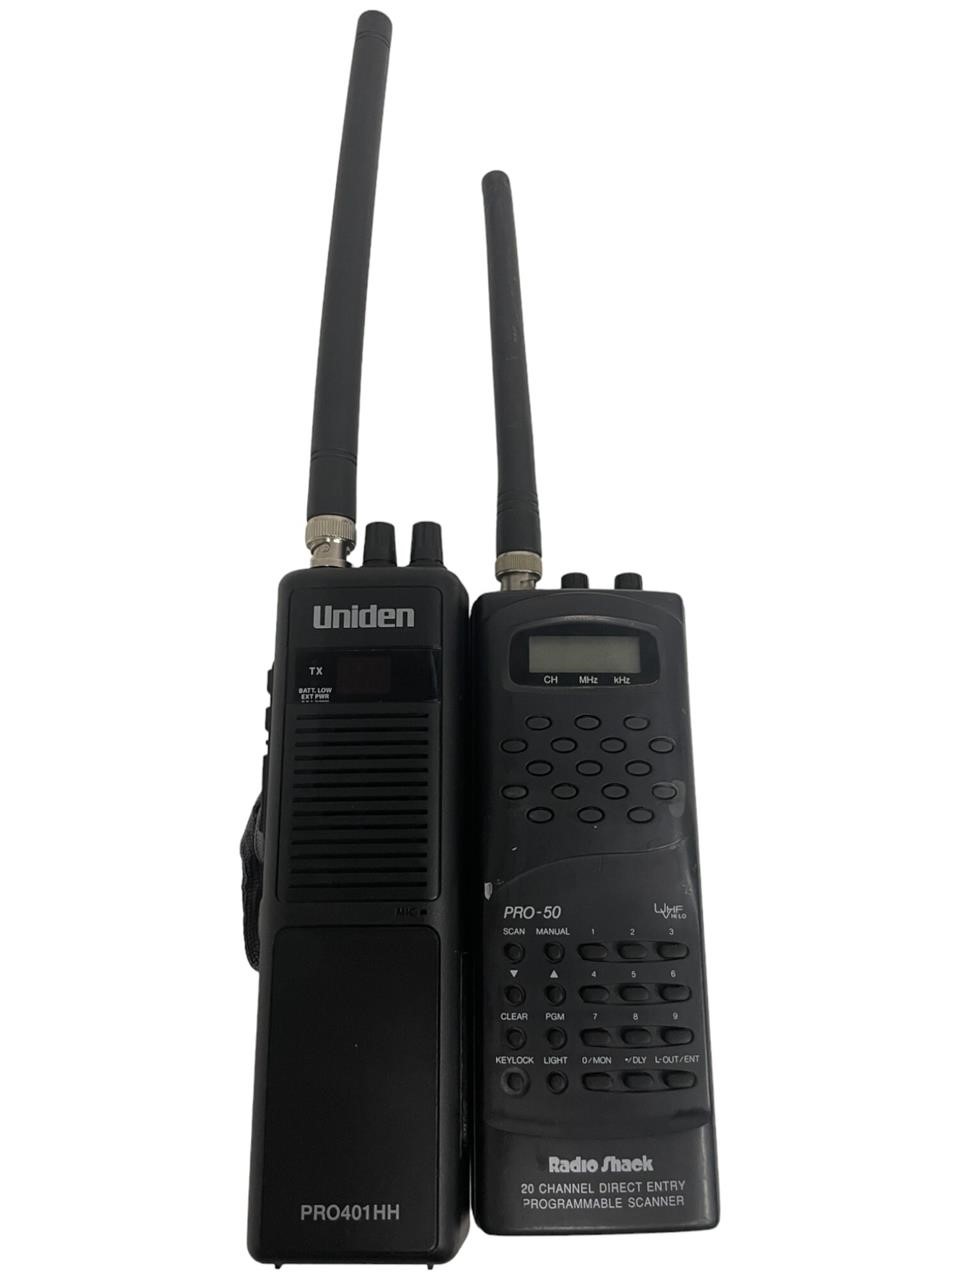 2-WAY RADIO AND SCANNER